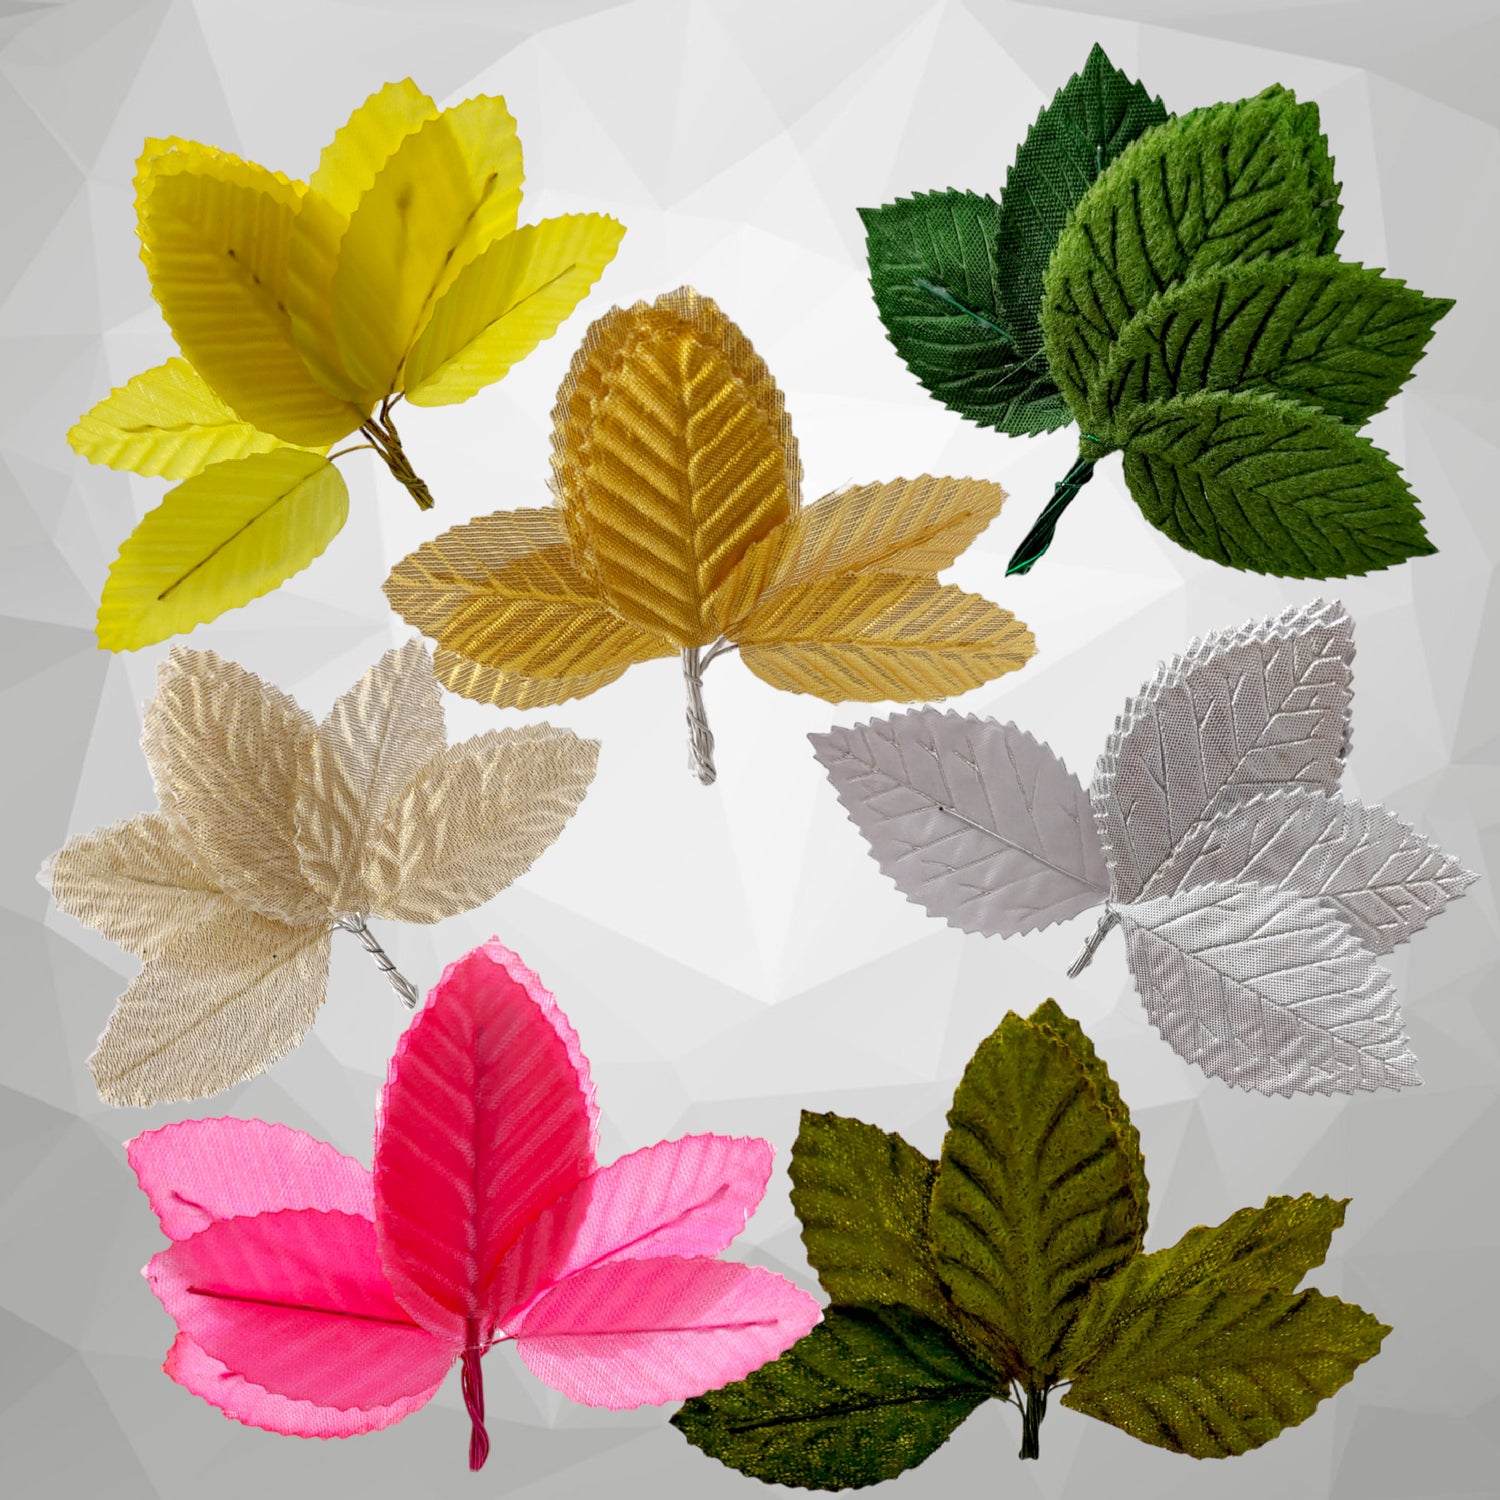 Premium Fabric Leaves for Crafts & Decor by Indian Petals - Lush & Lifelike 🍃 #CraftLeaves